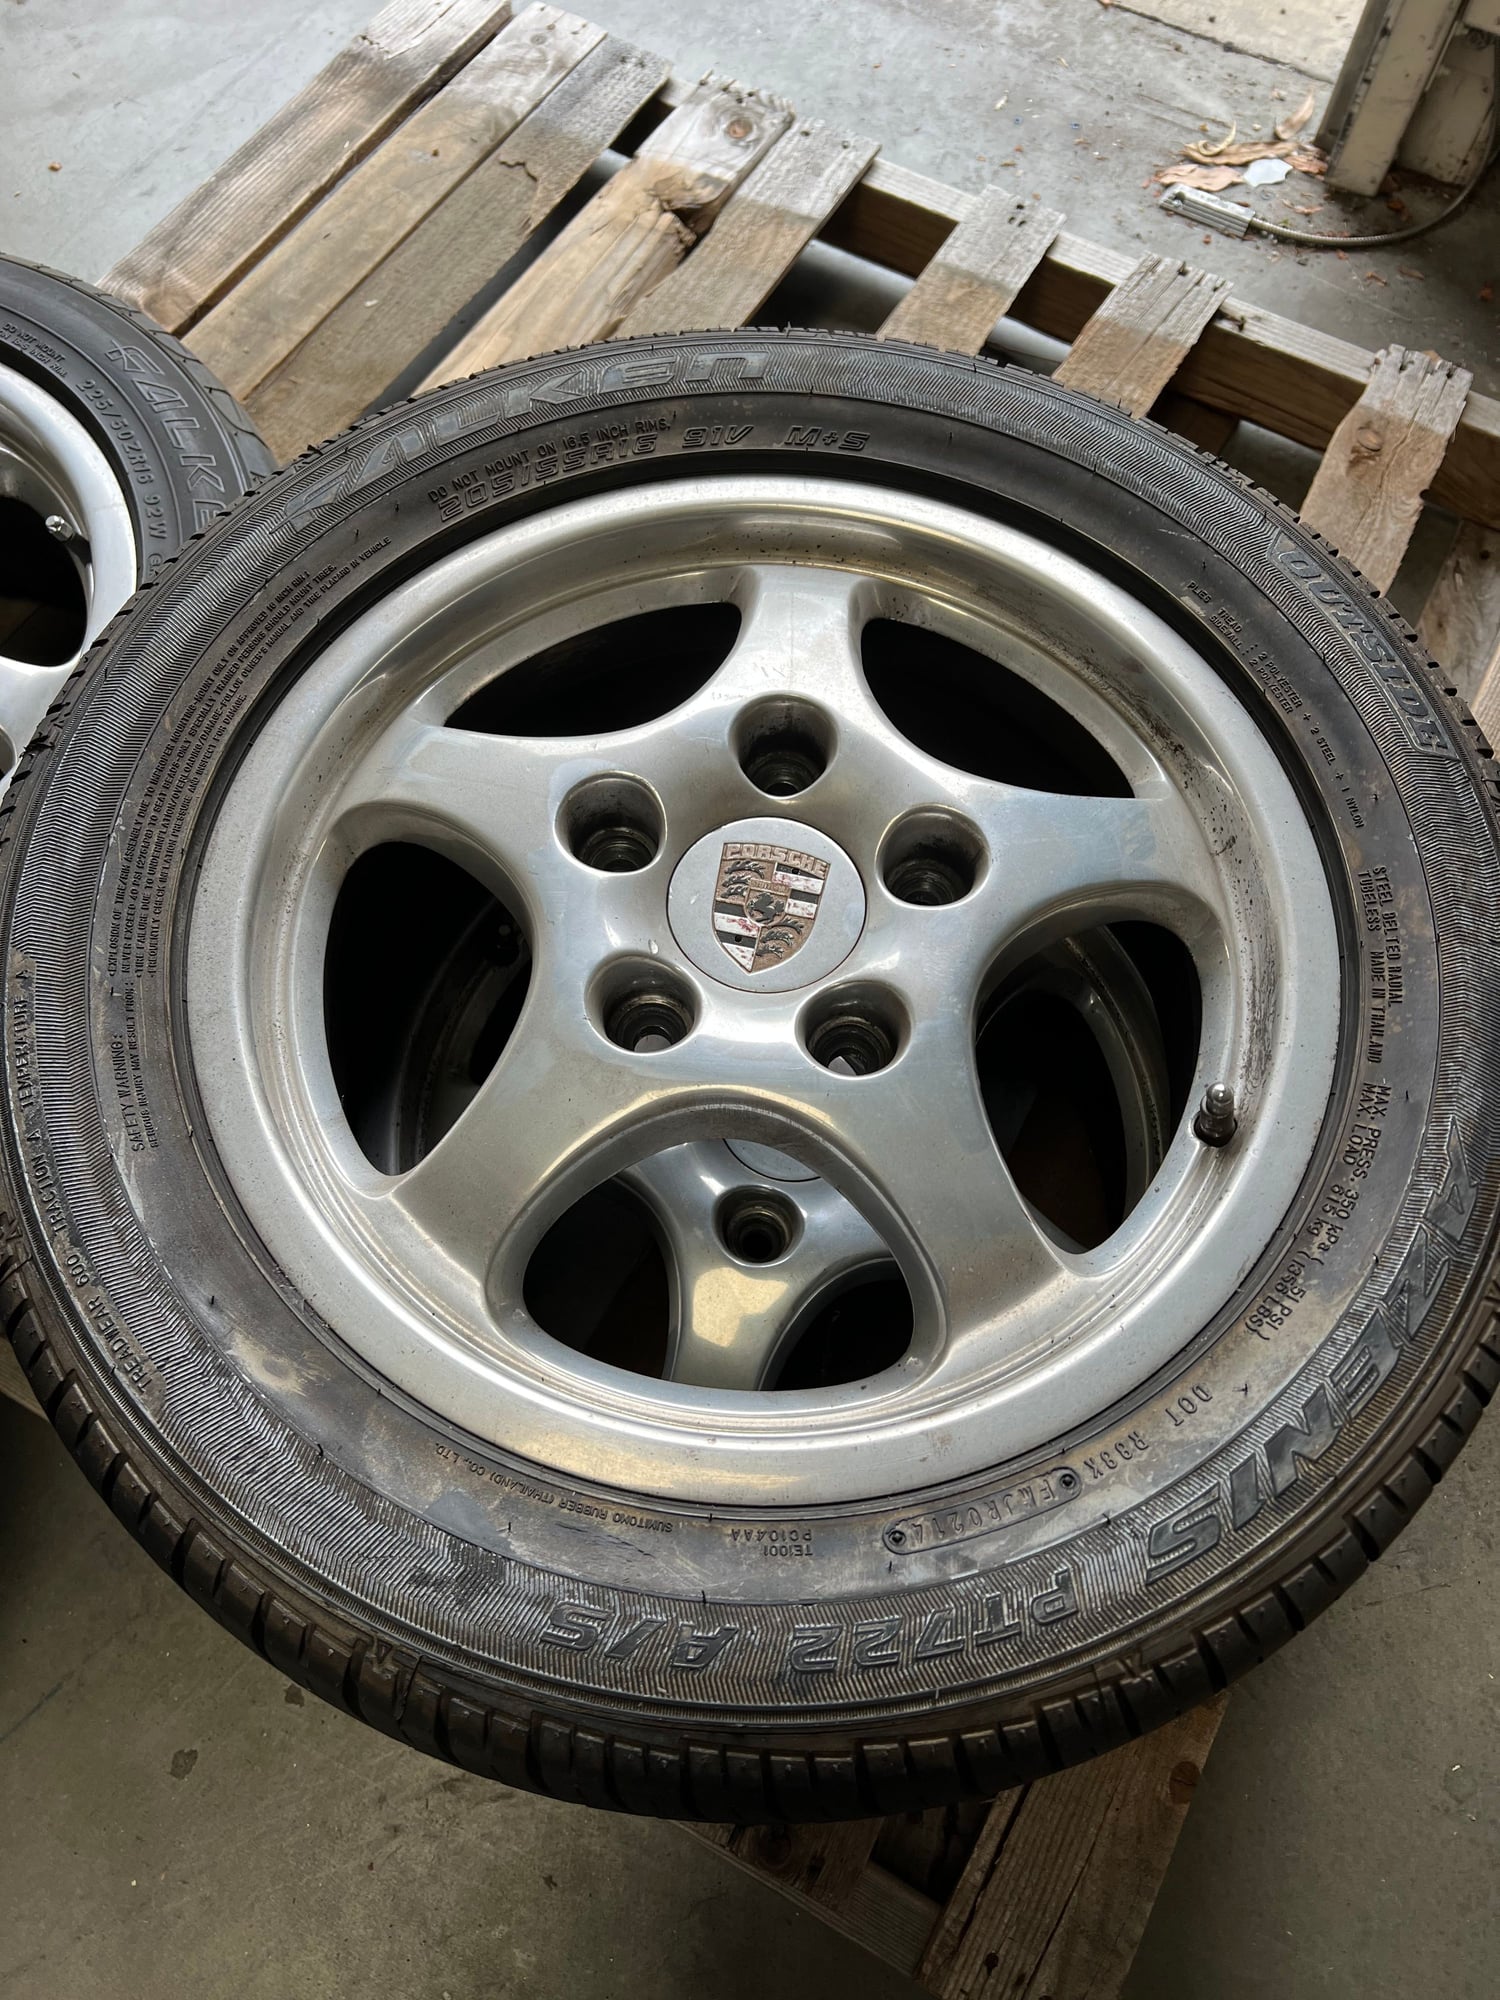 Wheels and Tires/Axles - FS: 964 16” Cup I Wheels - Used - 1989 to 1994 Porsche 911 - Brea, CA 92821, United States